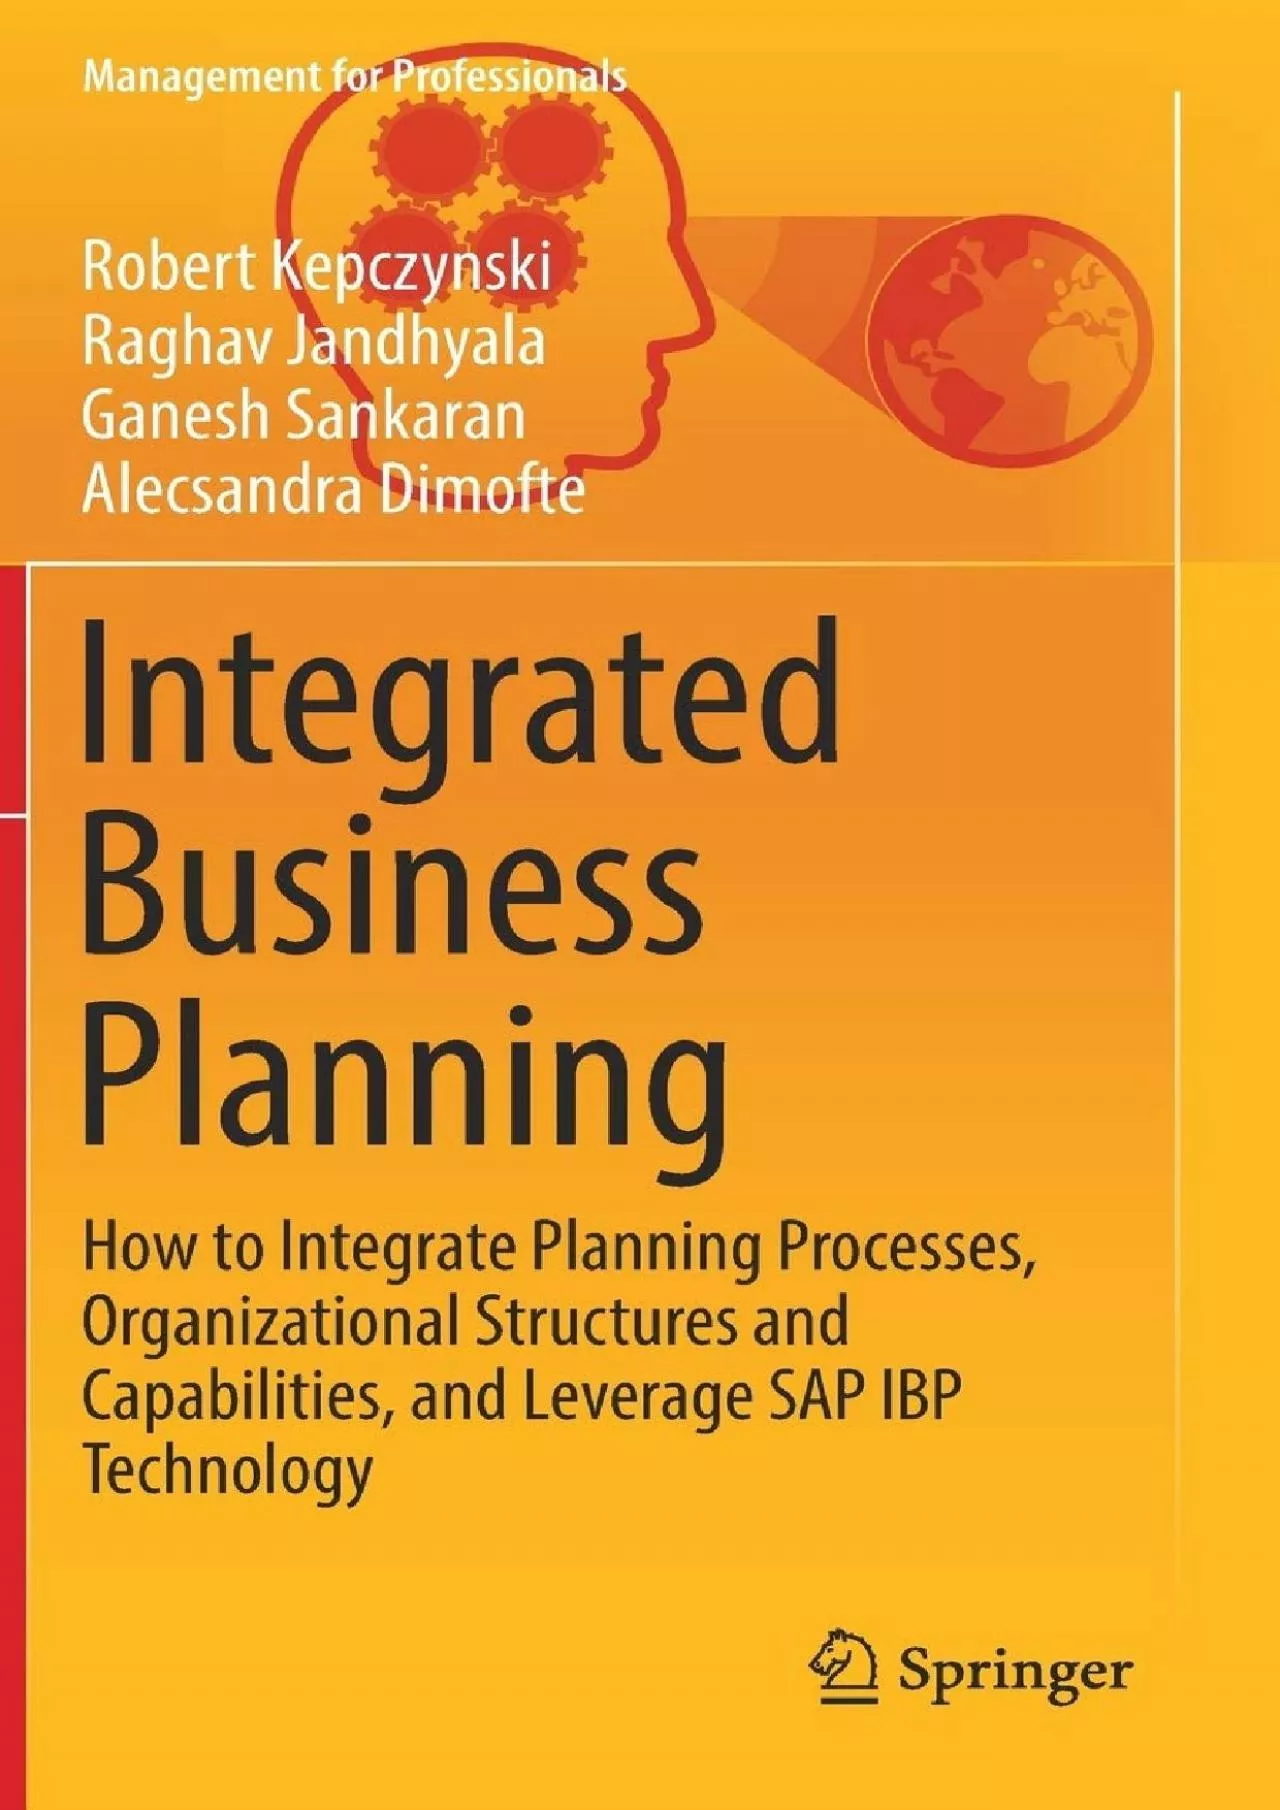 Integrated Business Planning: How to Integrate Planning Processes, Organizational Structures